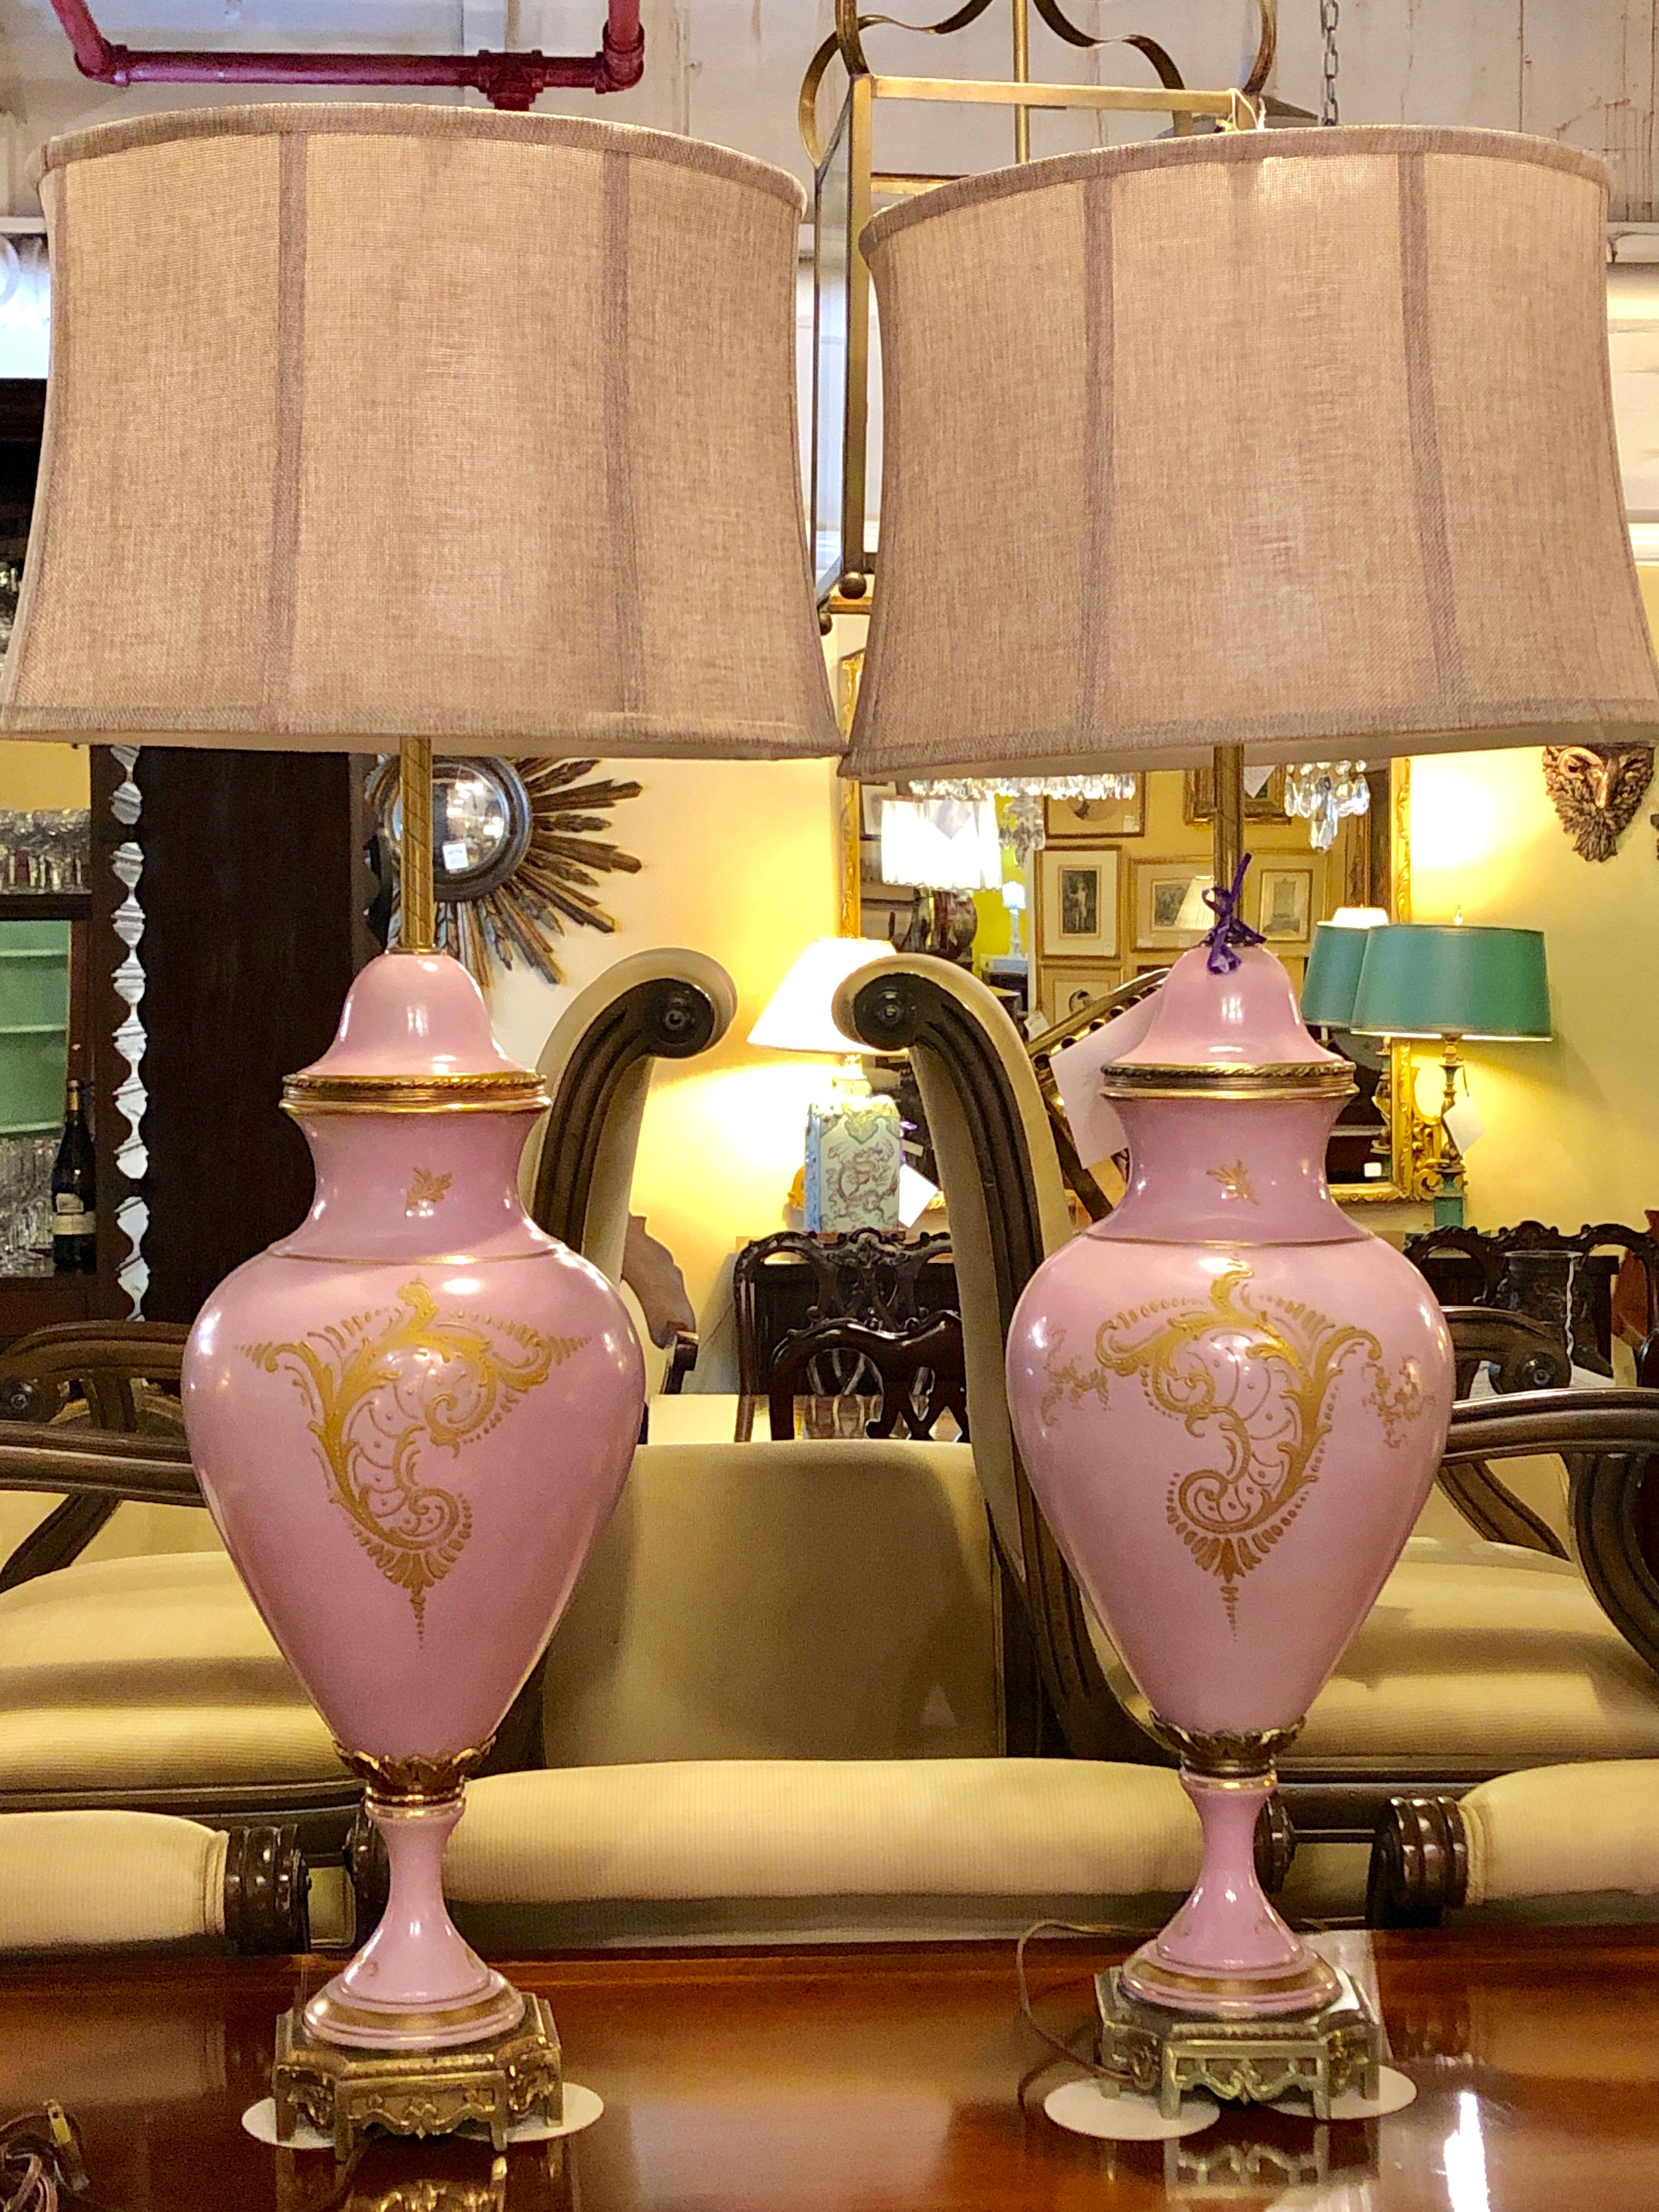 Pair of French Sevres marked monumental pink urn table lamps both signed Gillet. This Fine pair of hand painted lidded urns have been meticulously mounted as table lamps both bearing the Sevres mark on the base as well as the made in France wording.